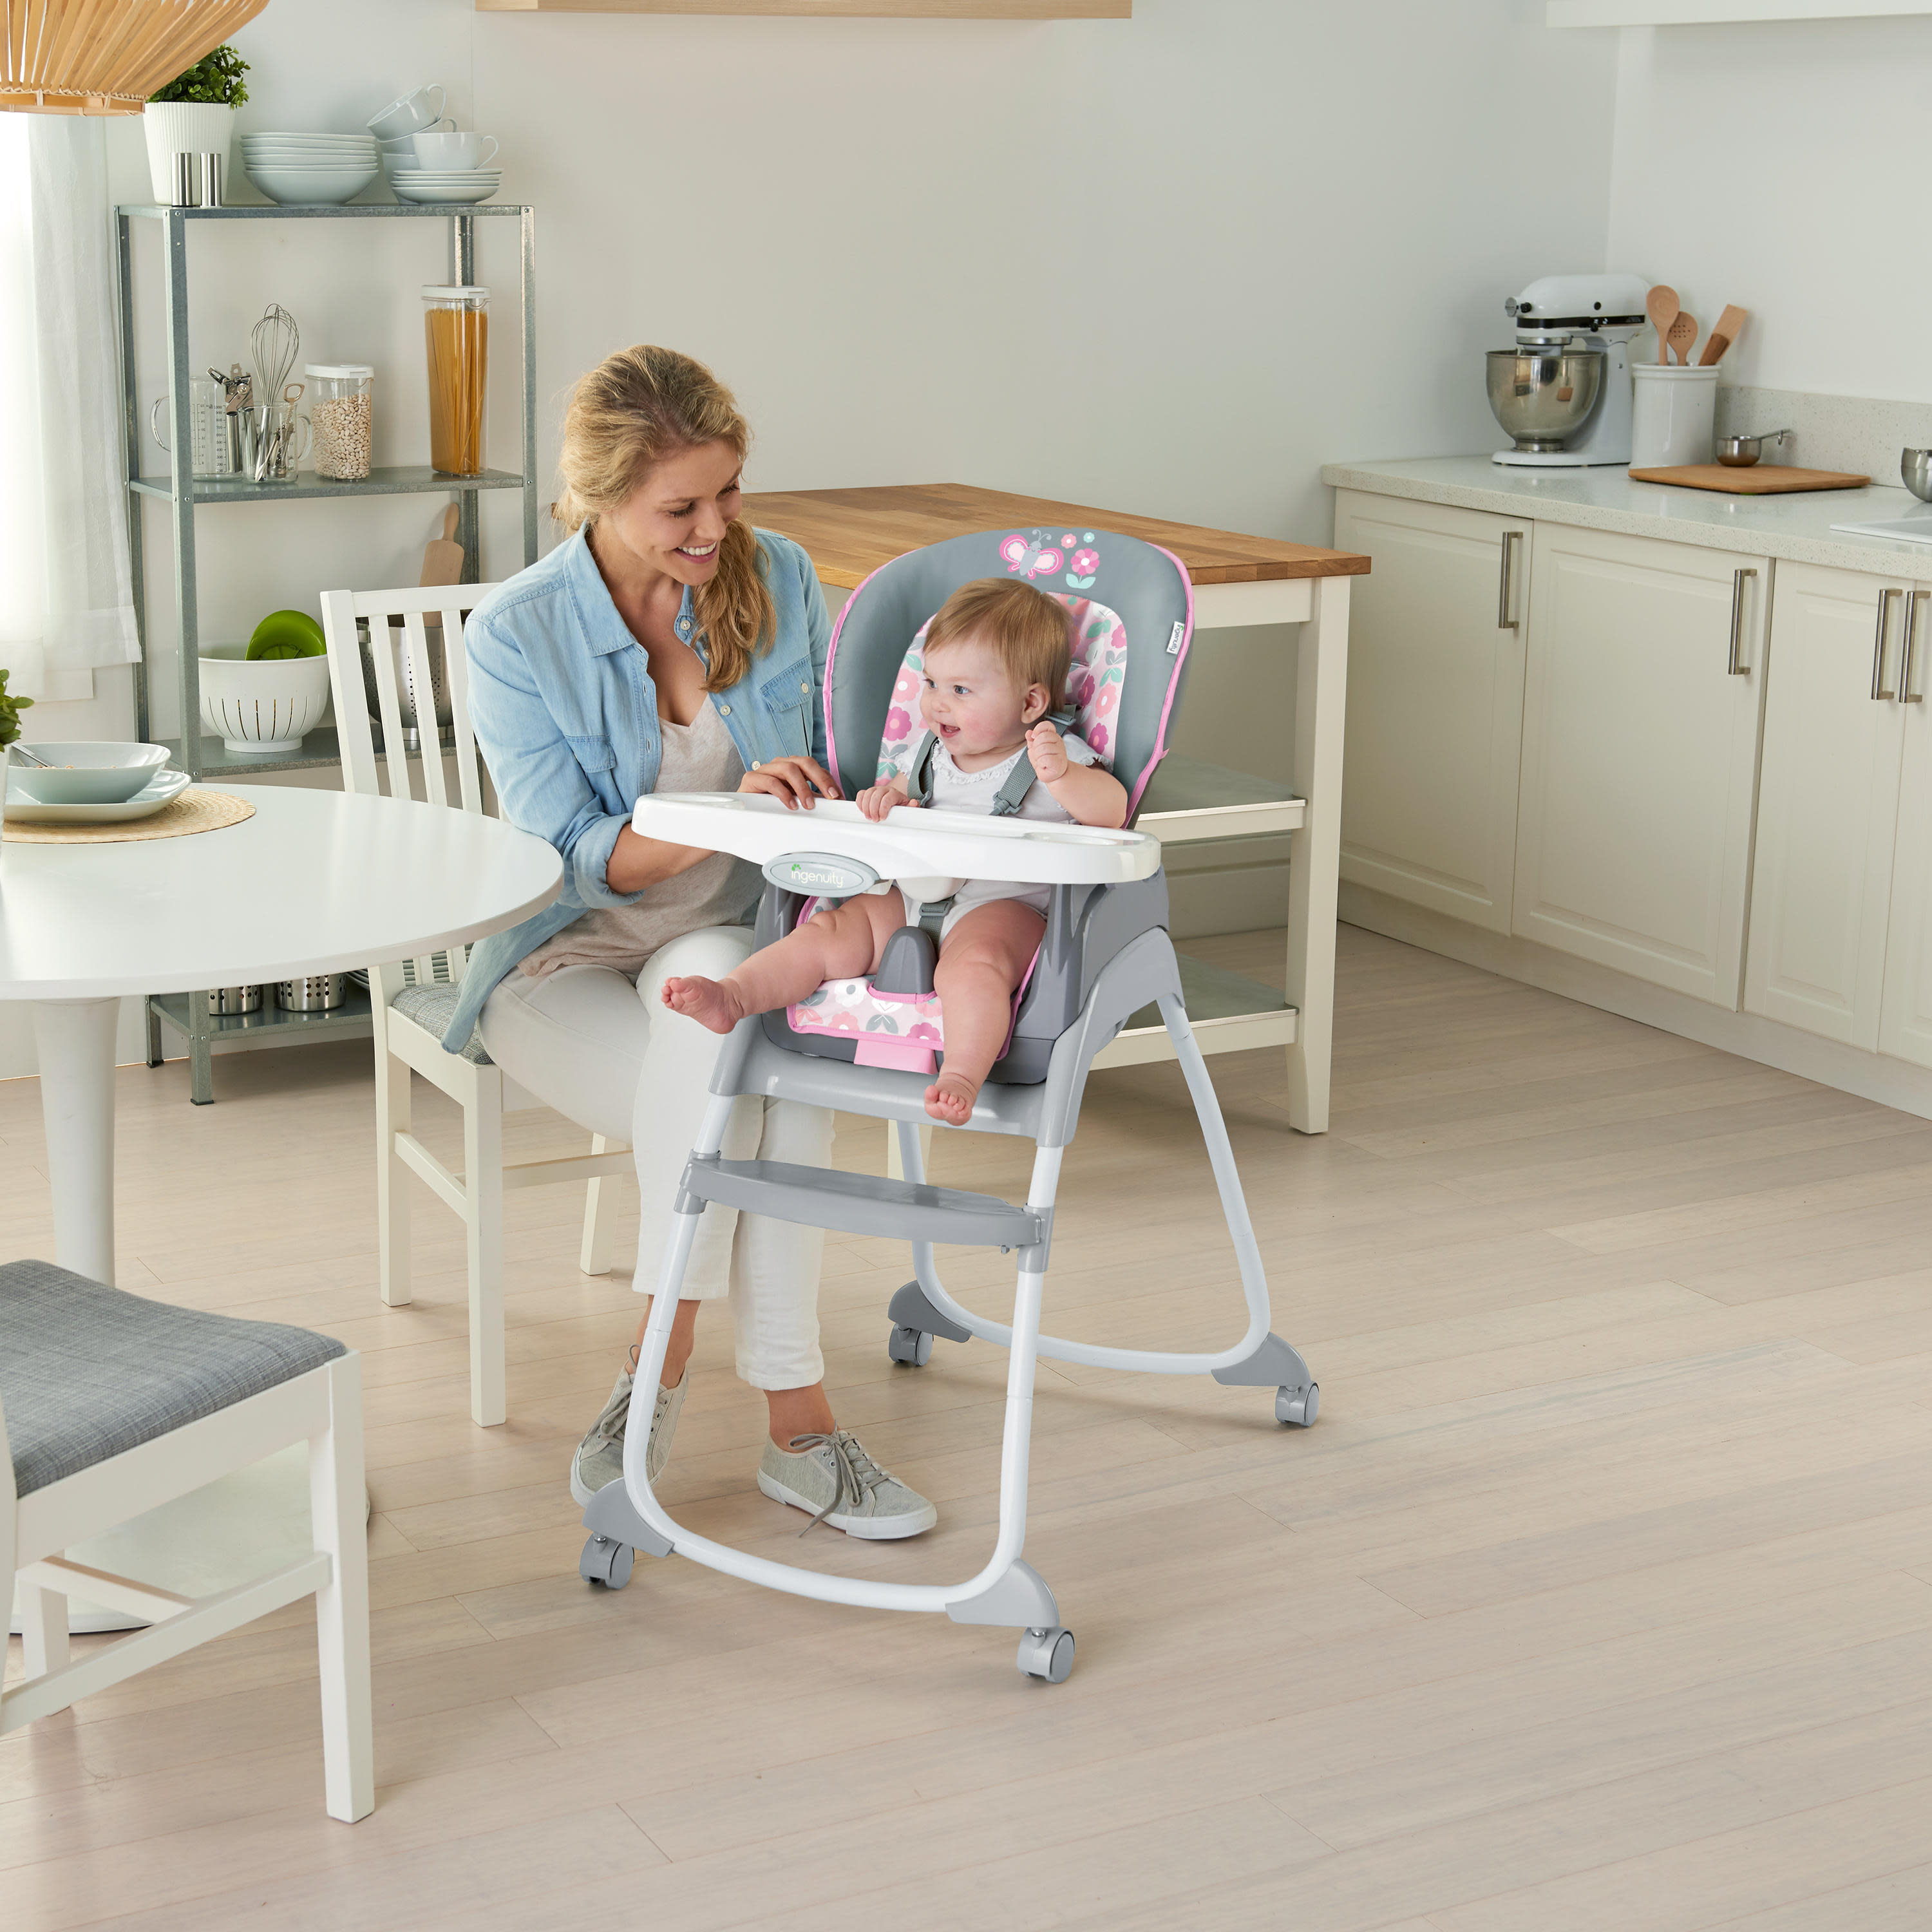 Ingenuity Trio 3-in-1 High Chair - Phoebe - image 5 of 13